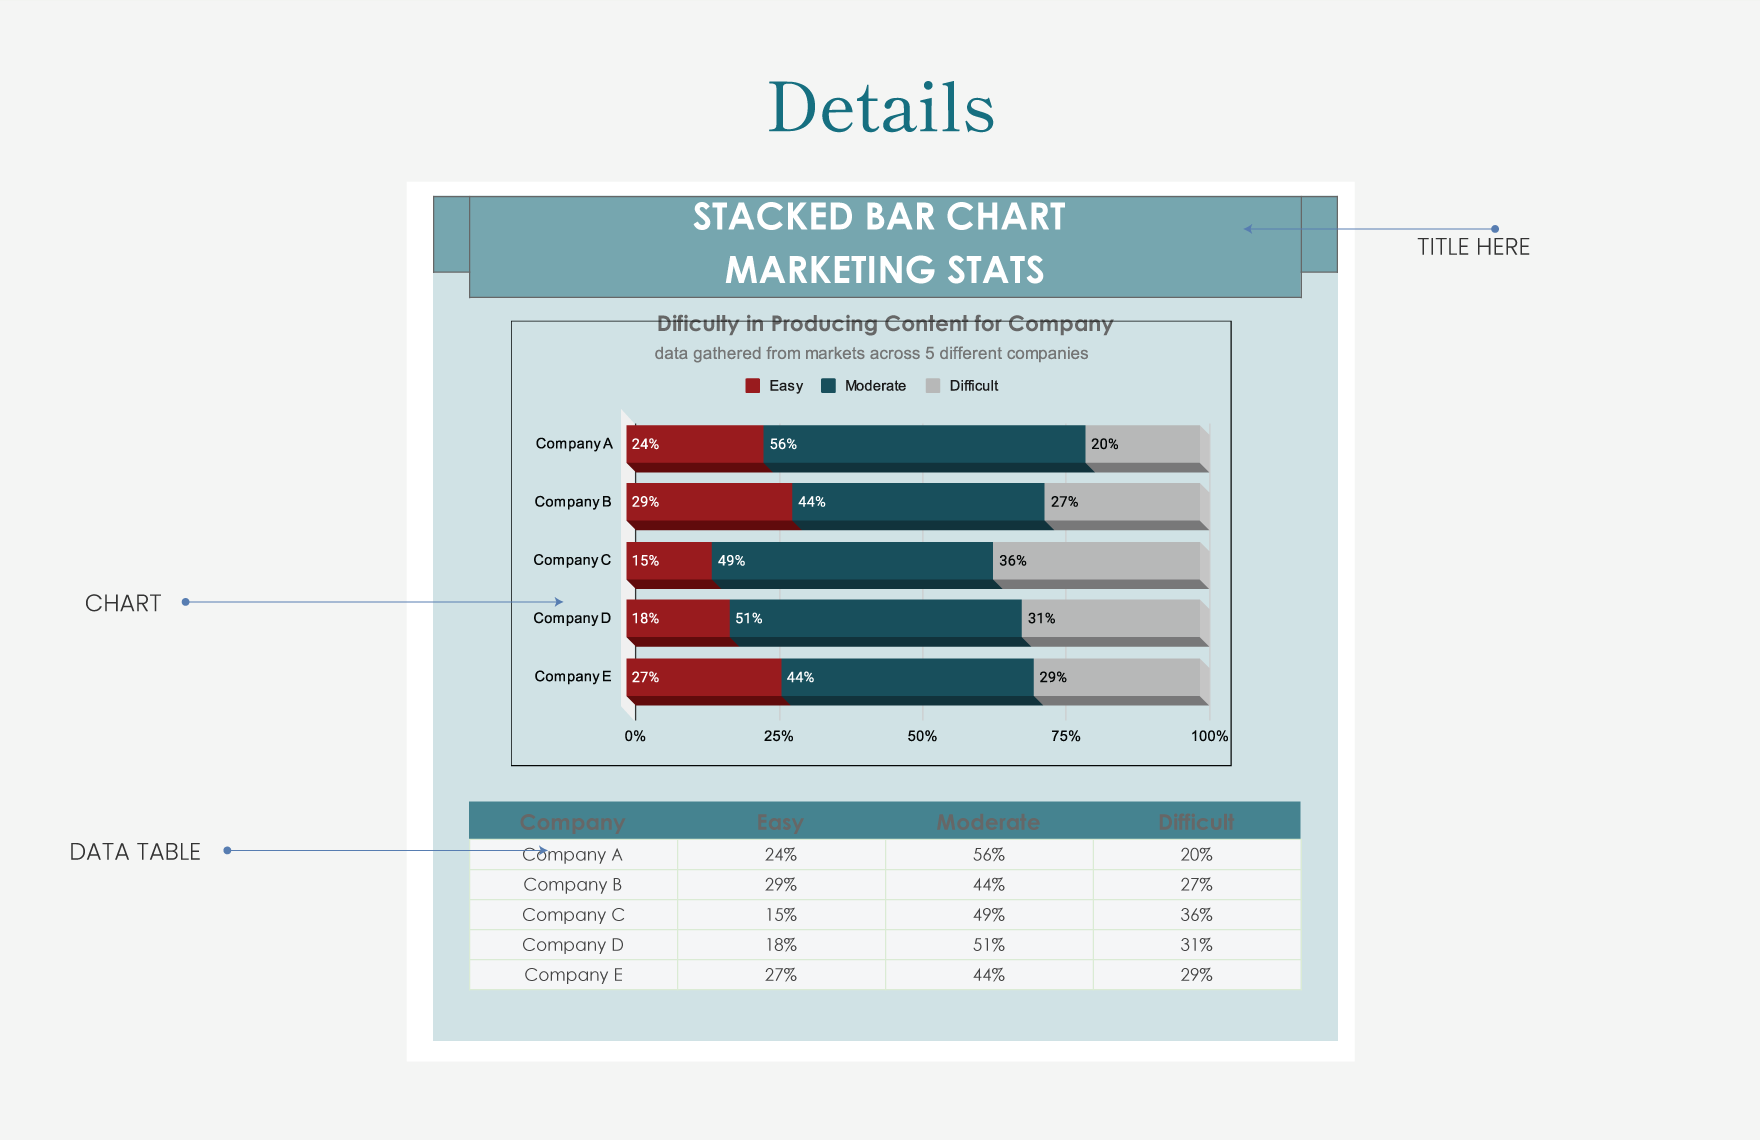 Stacked Bar Chart Marketing Stats Template